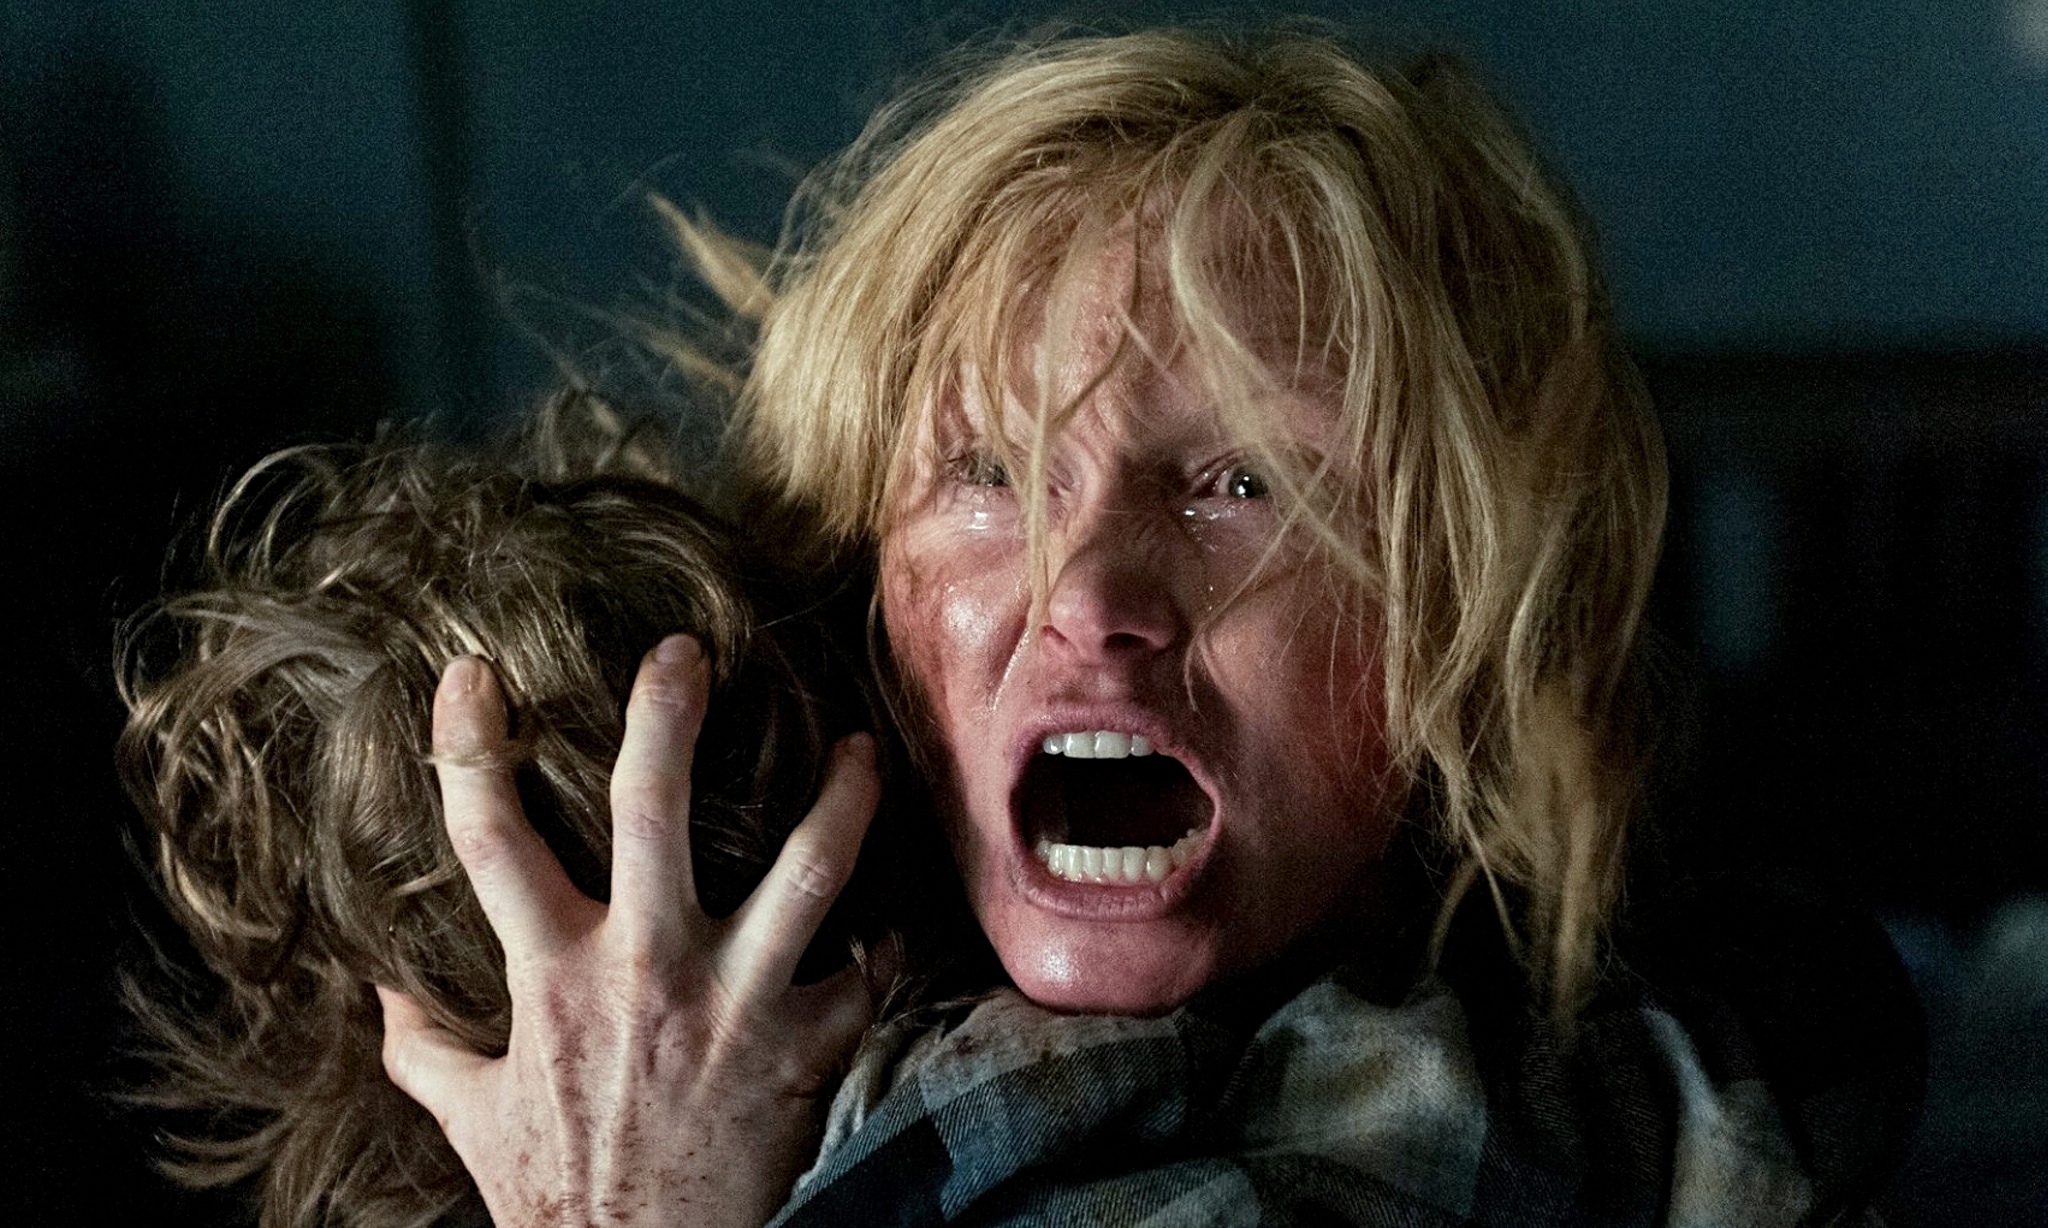 Movie The Babadook HD Wallpaper | Background Image